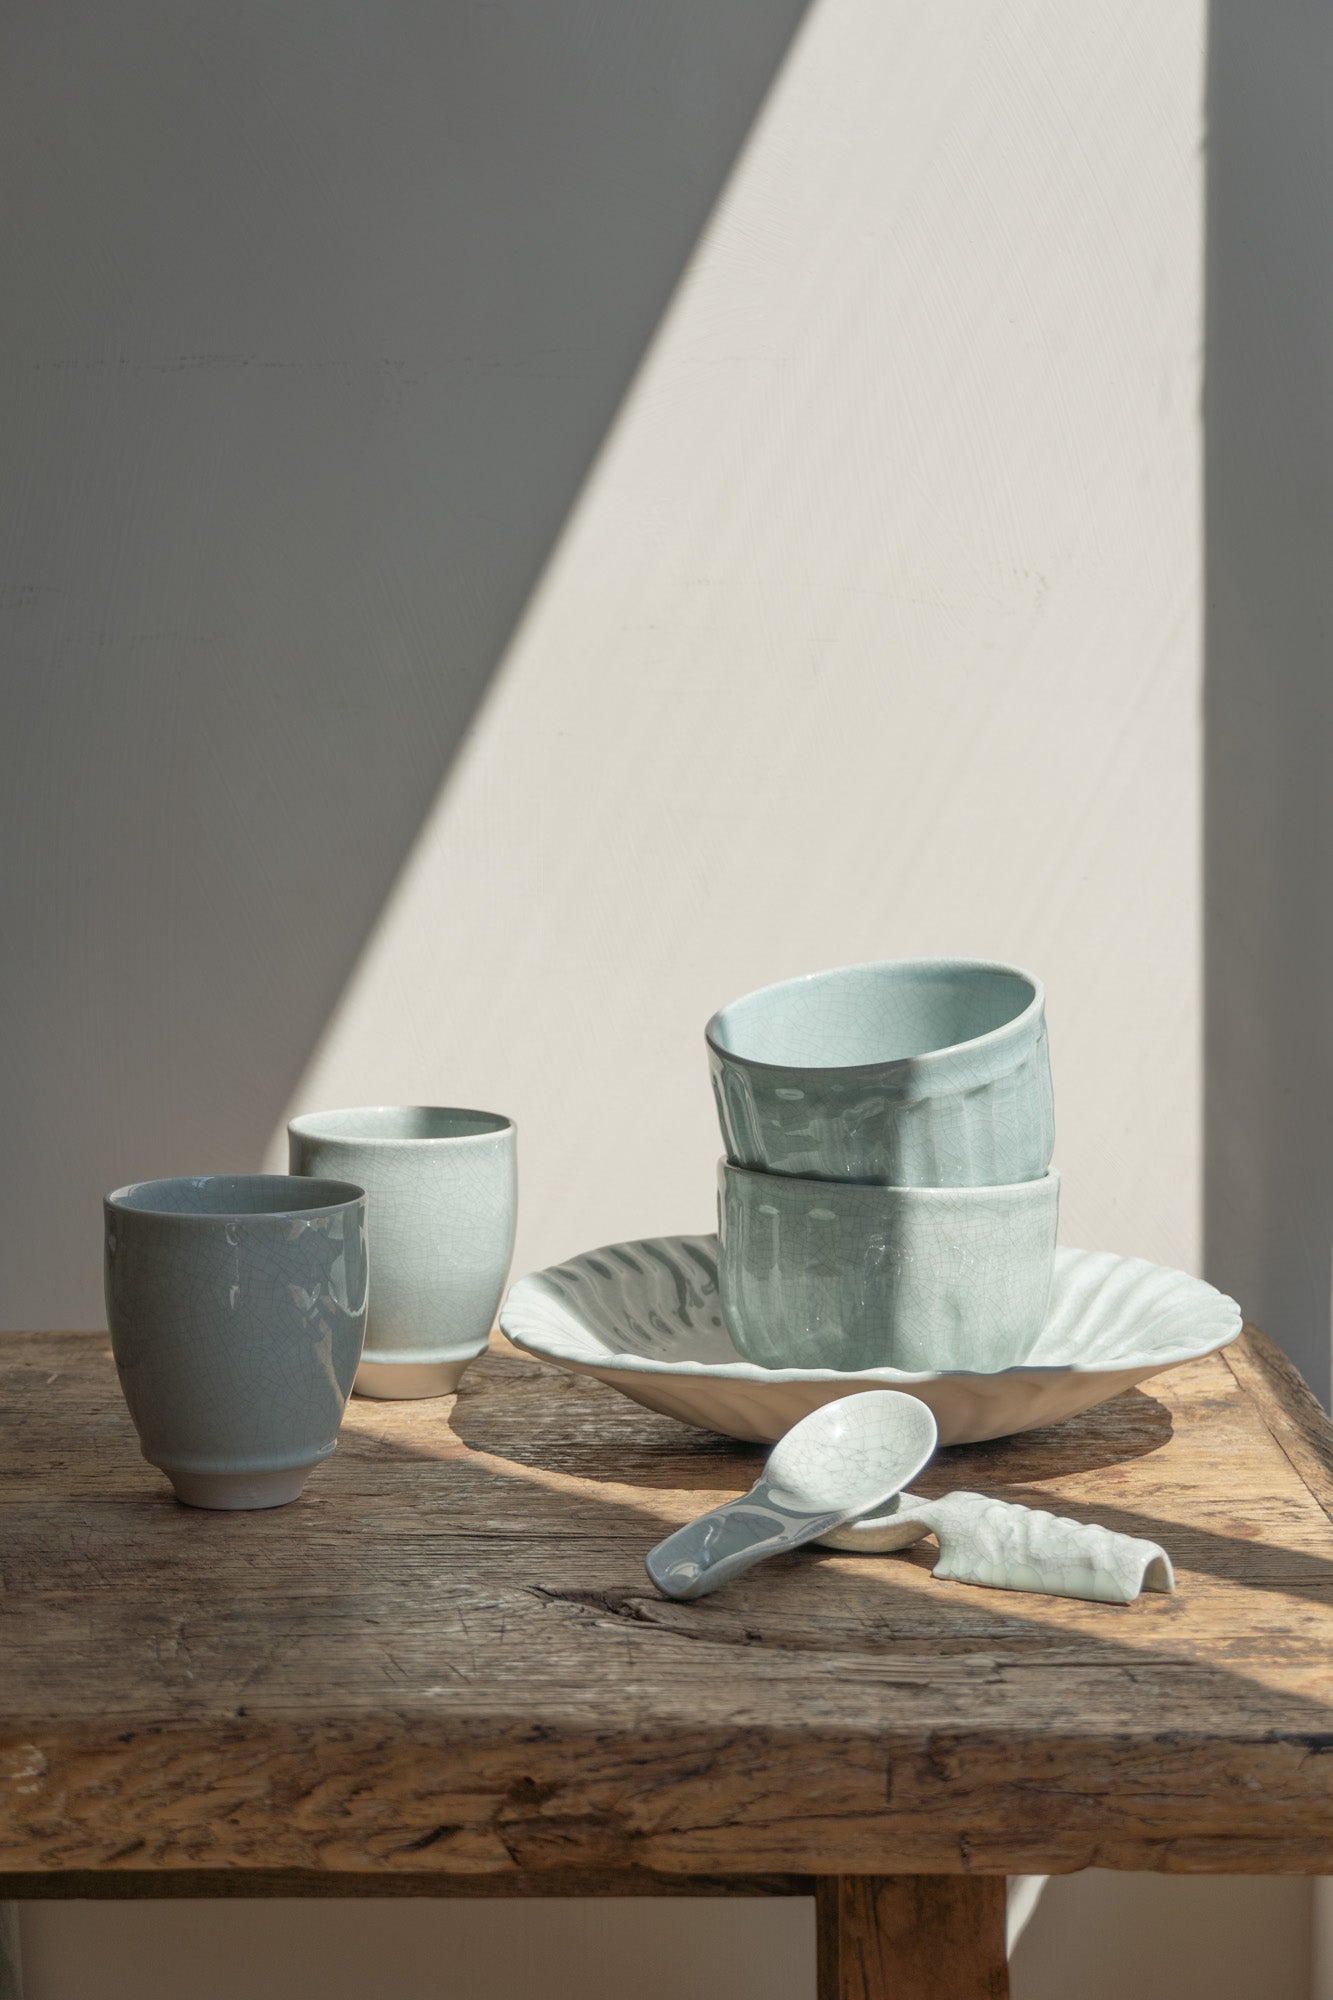 The Celadon coloured Dashi collection by Jars Ceramistes.